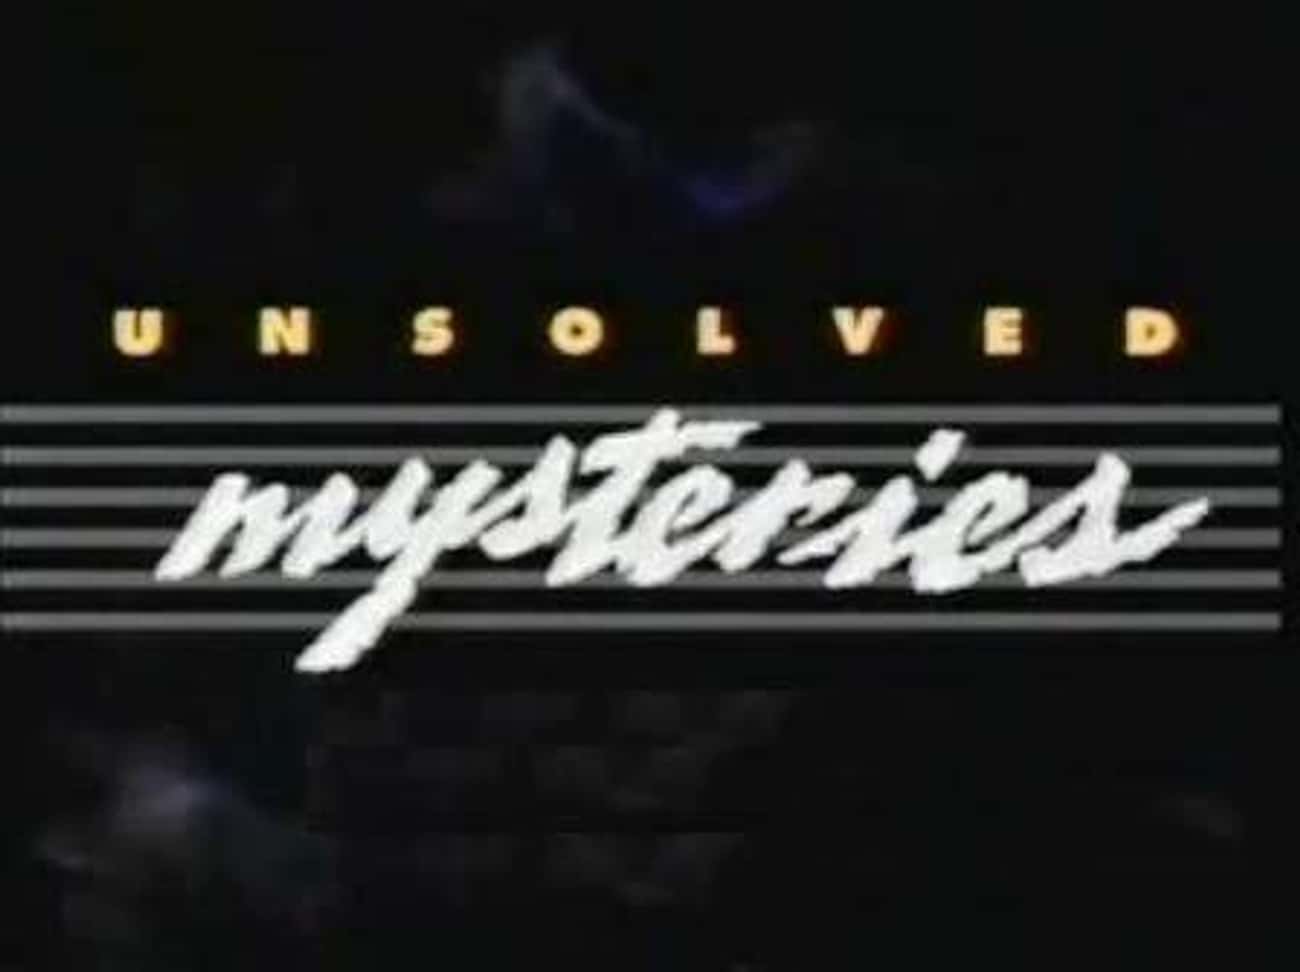 One Woman Found Her Daughter After Watching An Episode Of "Unsolved Mysteries"